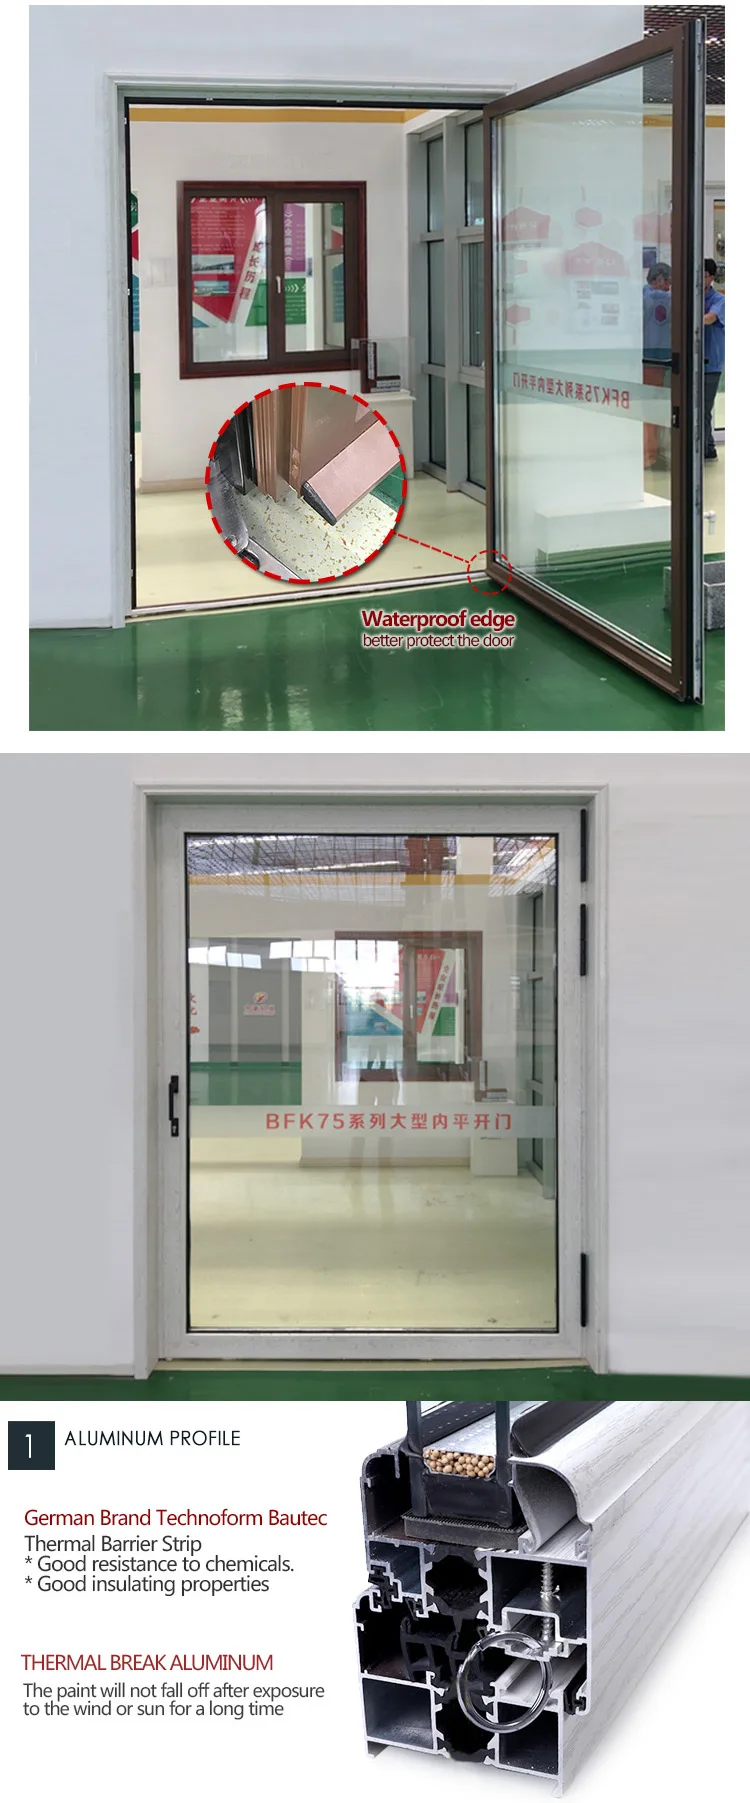 Unique style hurricane impact entry doors glazed entrance glass for front